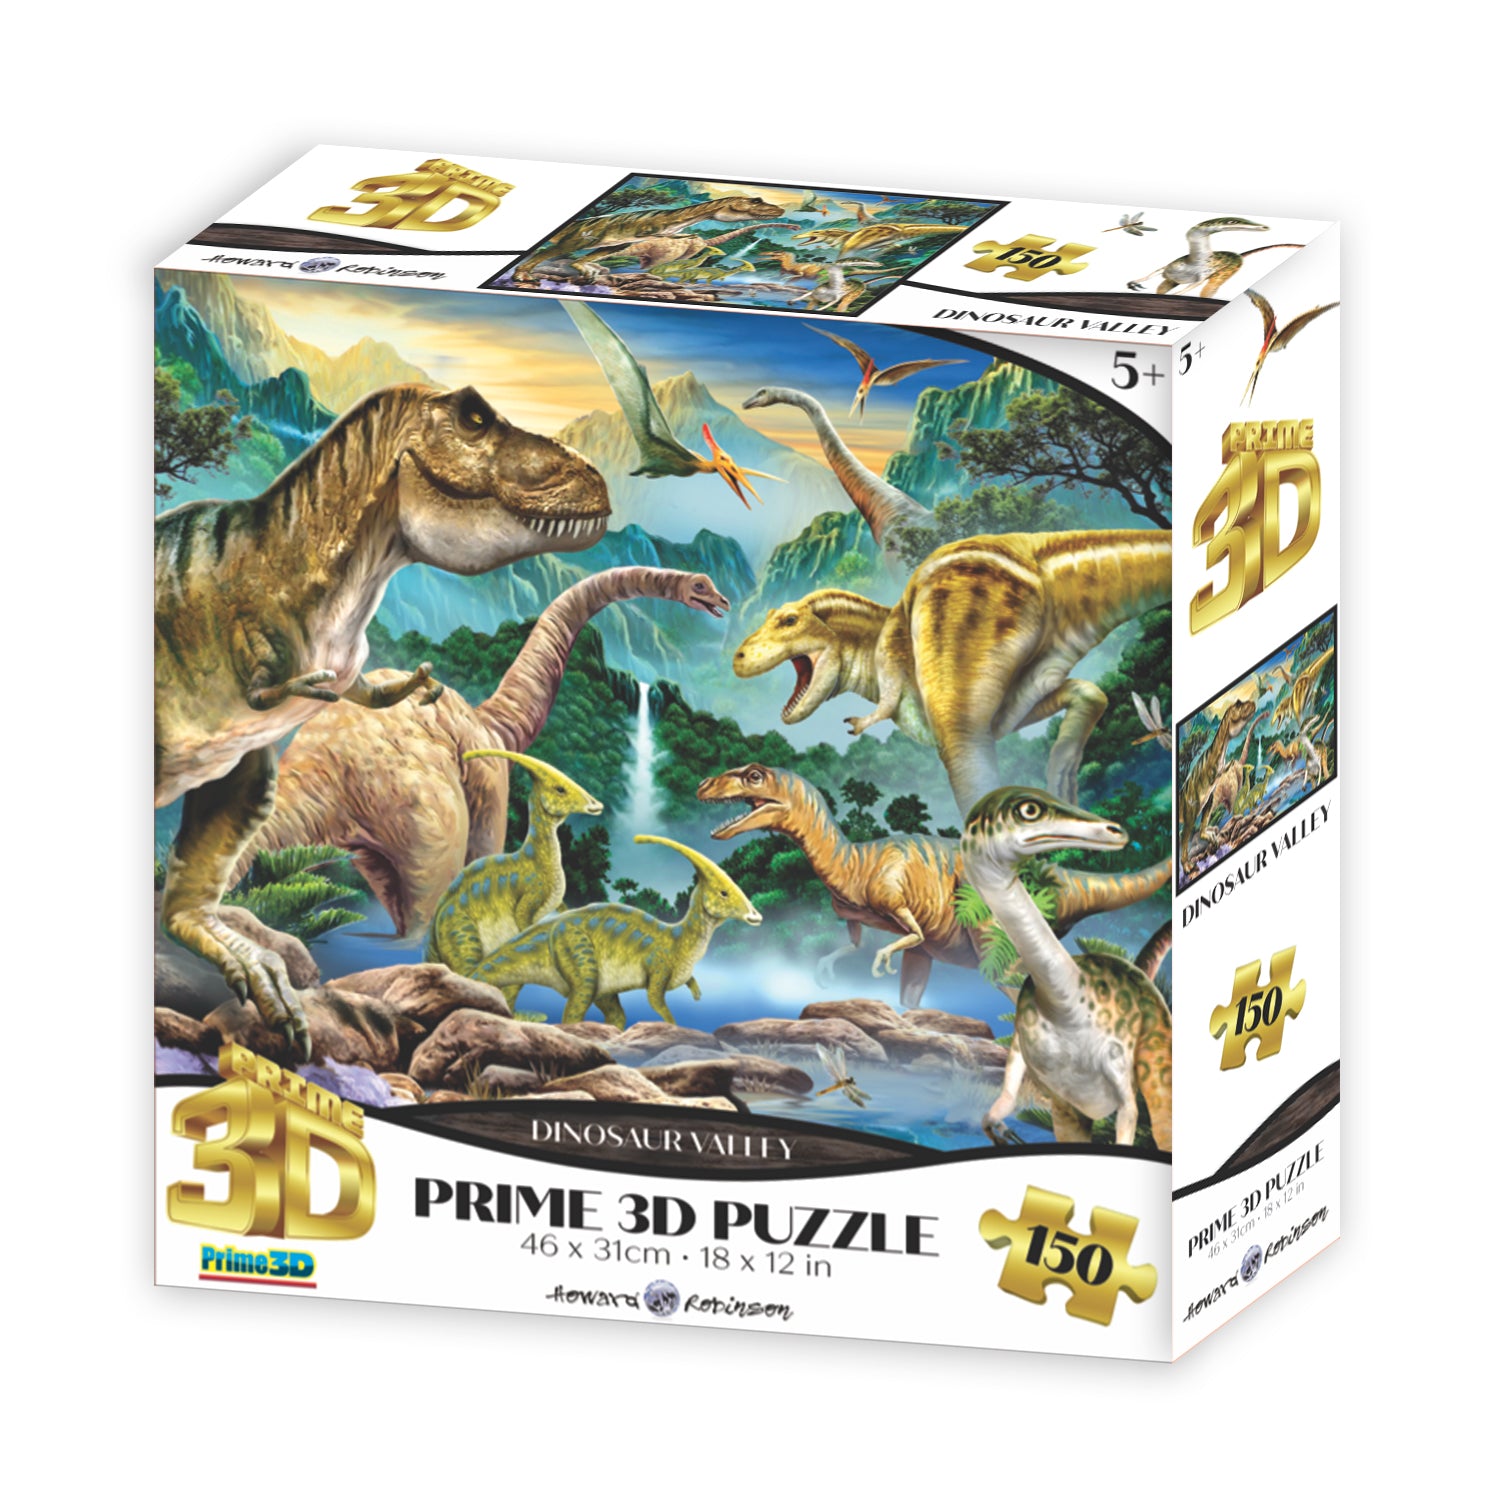 Dinosaur Valley 150 piece 3D Jigsaw Puzzle - Chester Model Centre